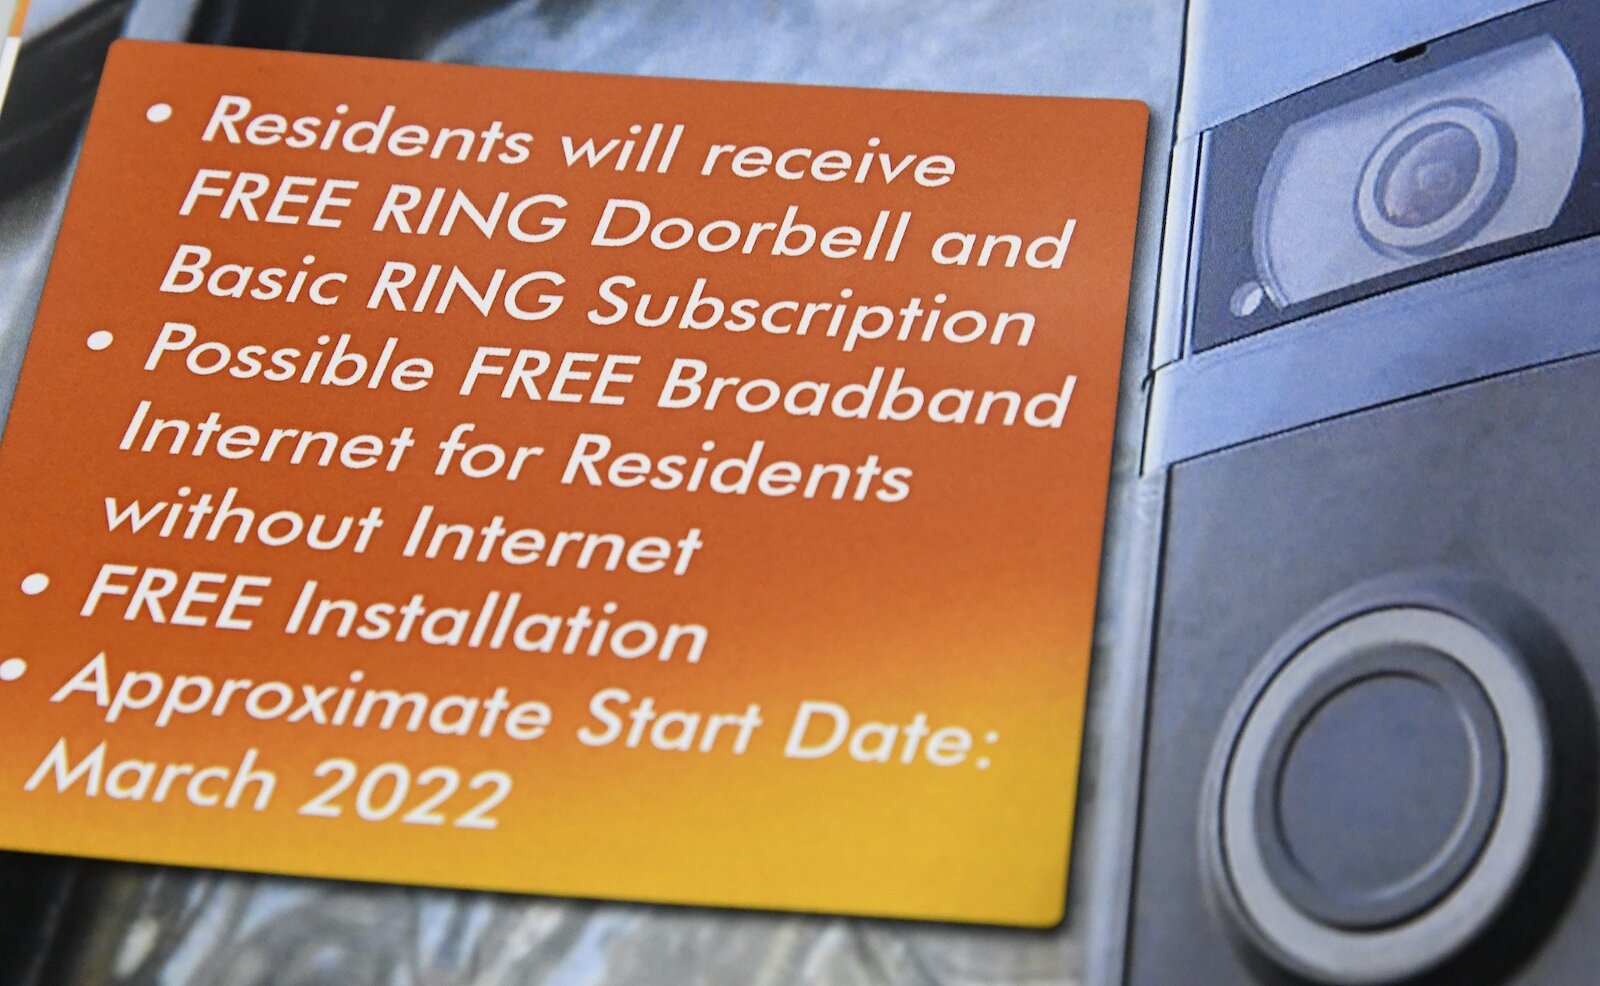 Ring Doorbell Doesn't See Wi-Fi - MajorGeeks